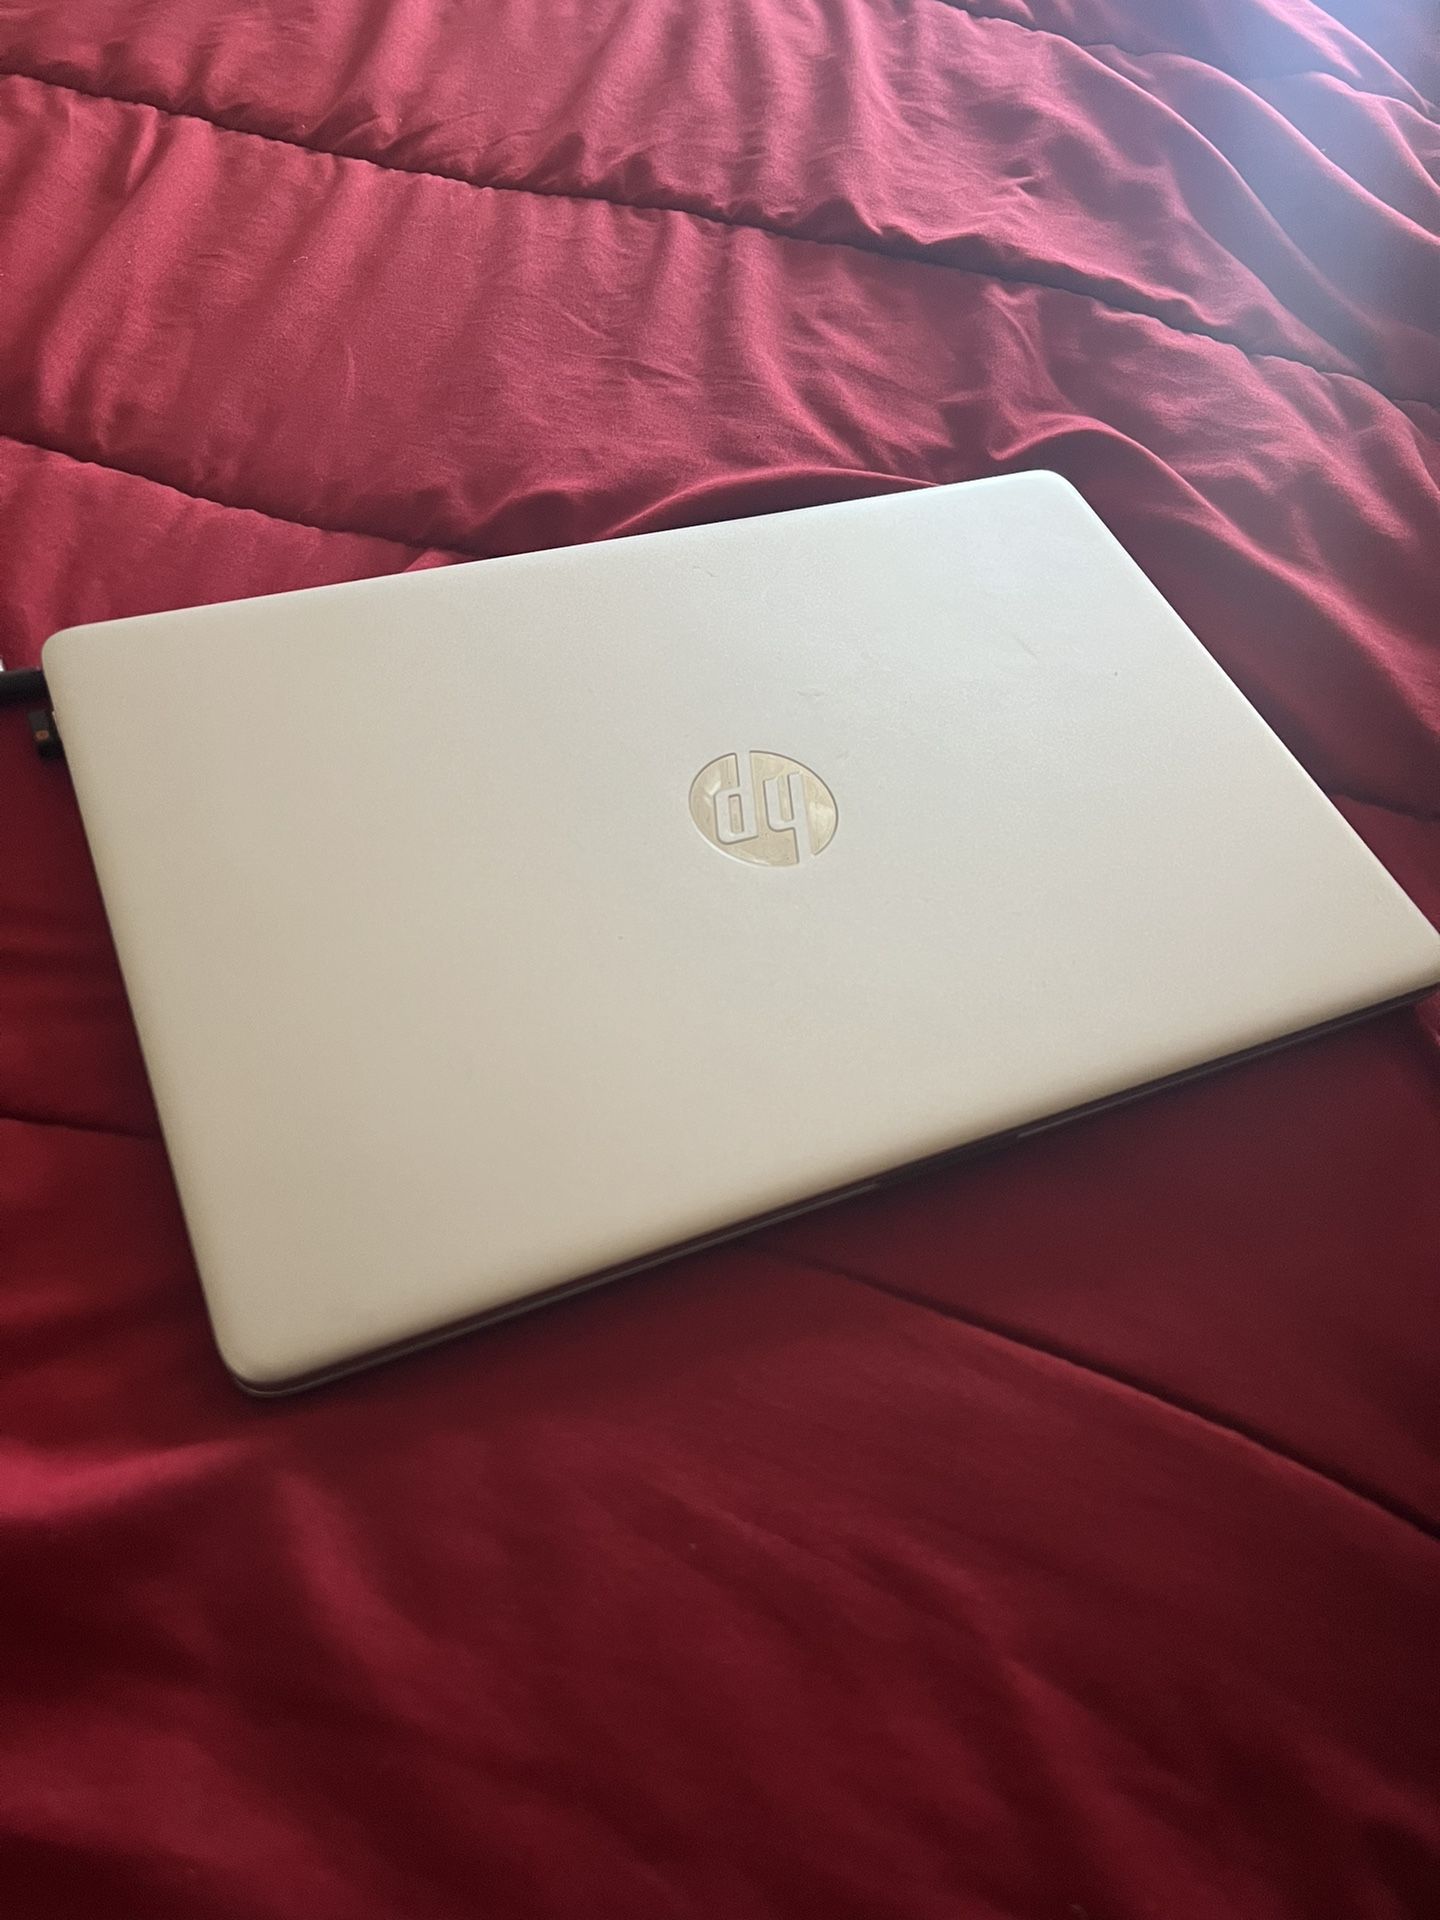 HP laptop for sell! 512SSD i5 Intel and 15 inch screen